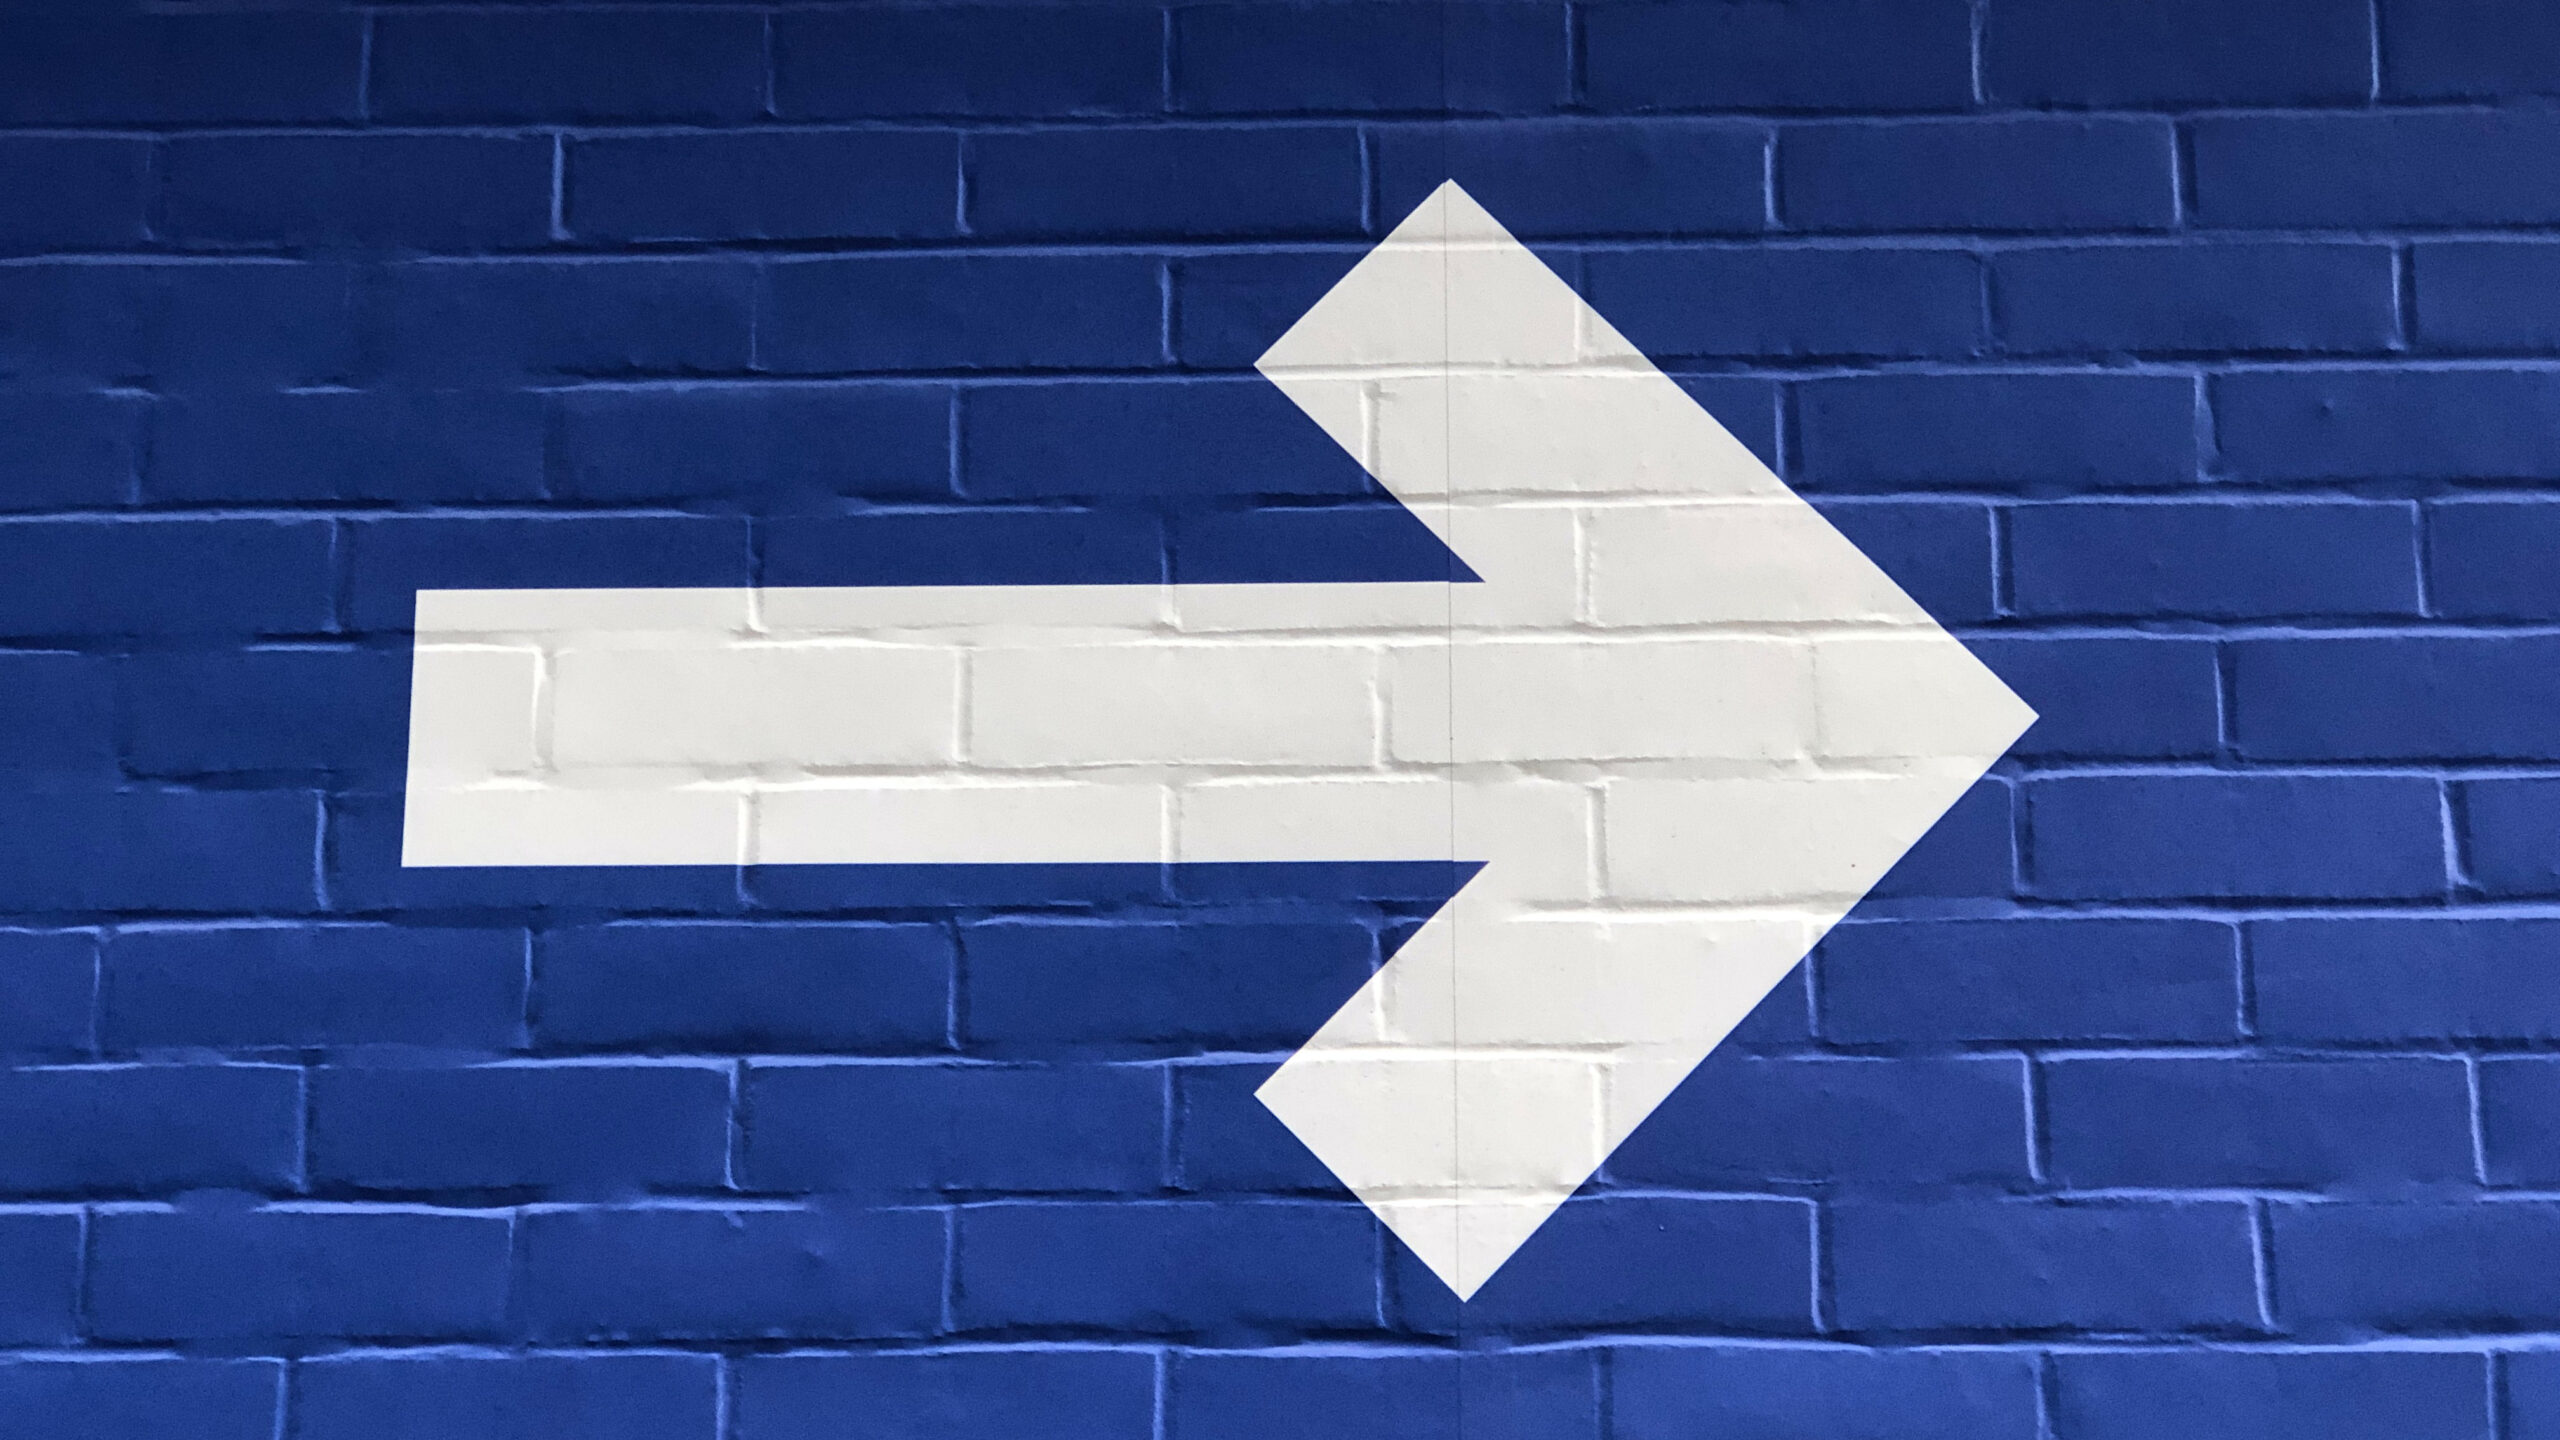 White arrow on a blue brick wall pointing forward, toward finding meaning.